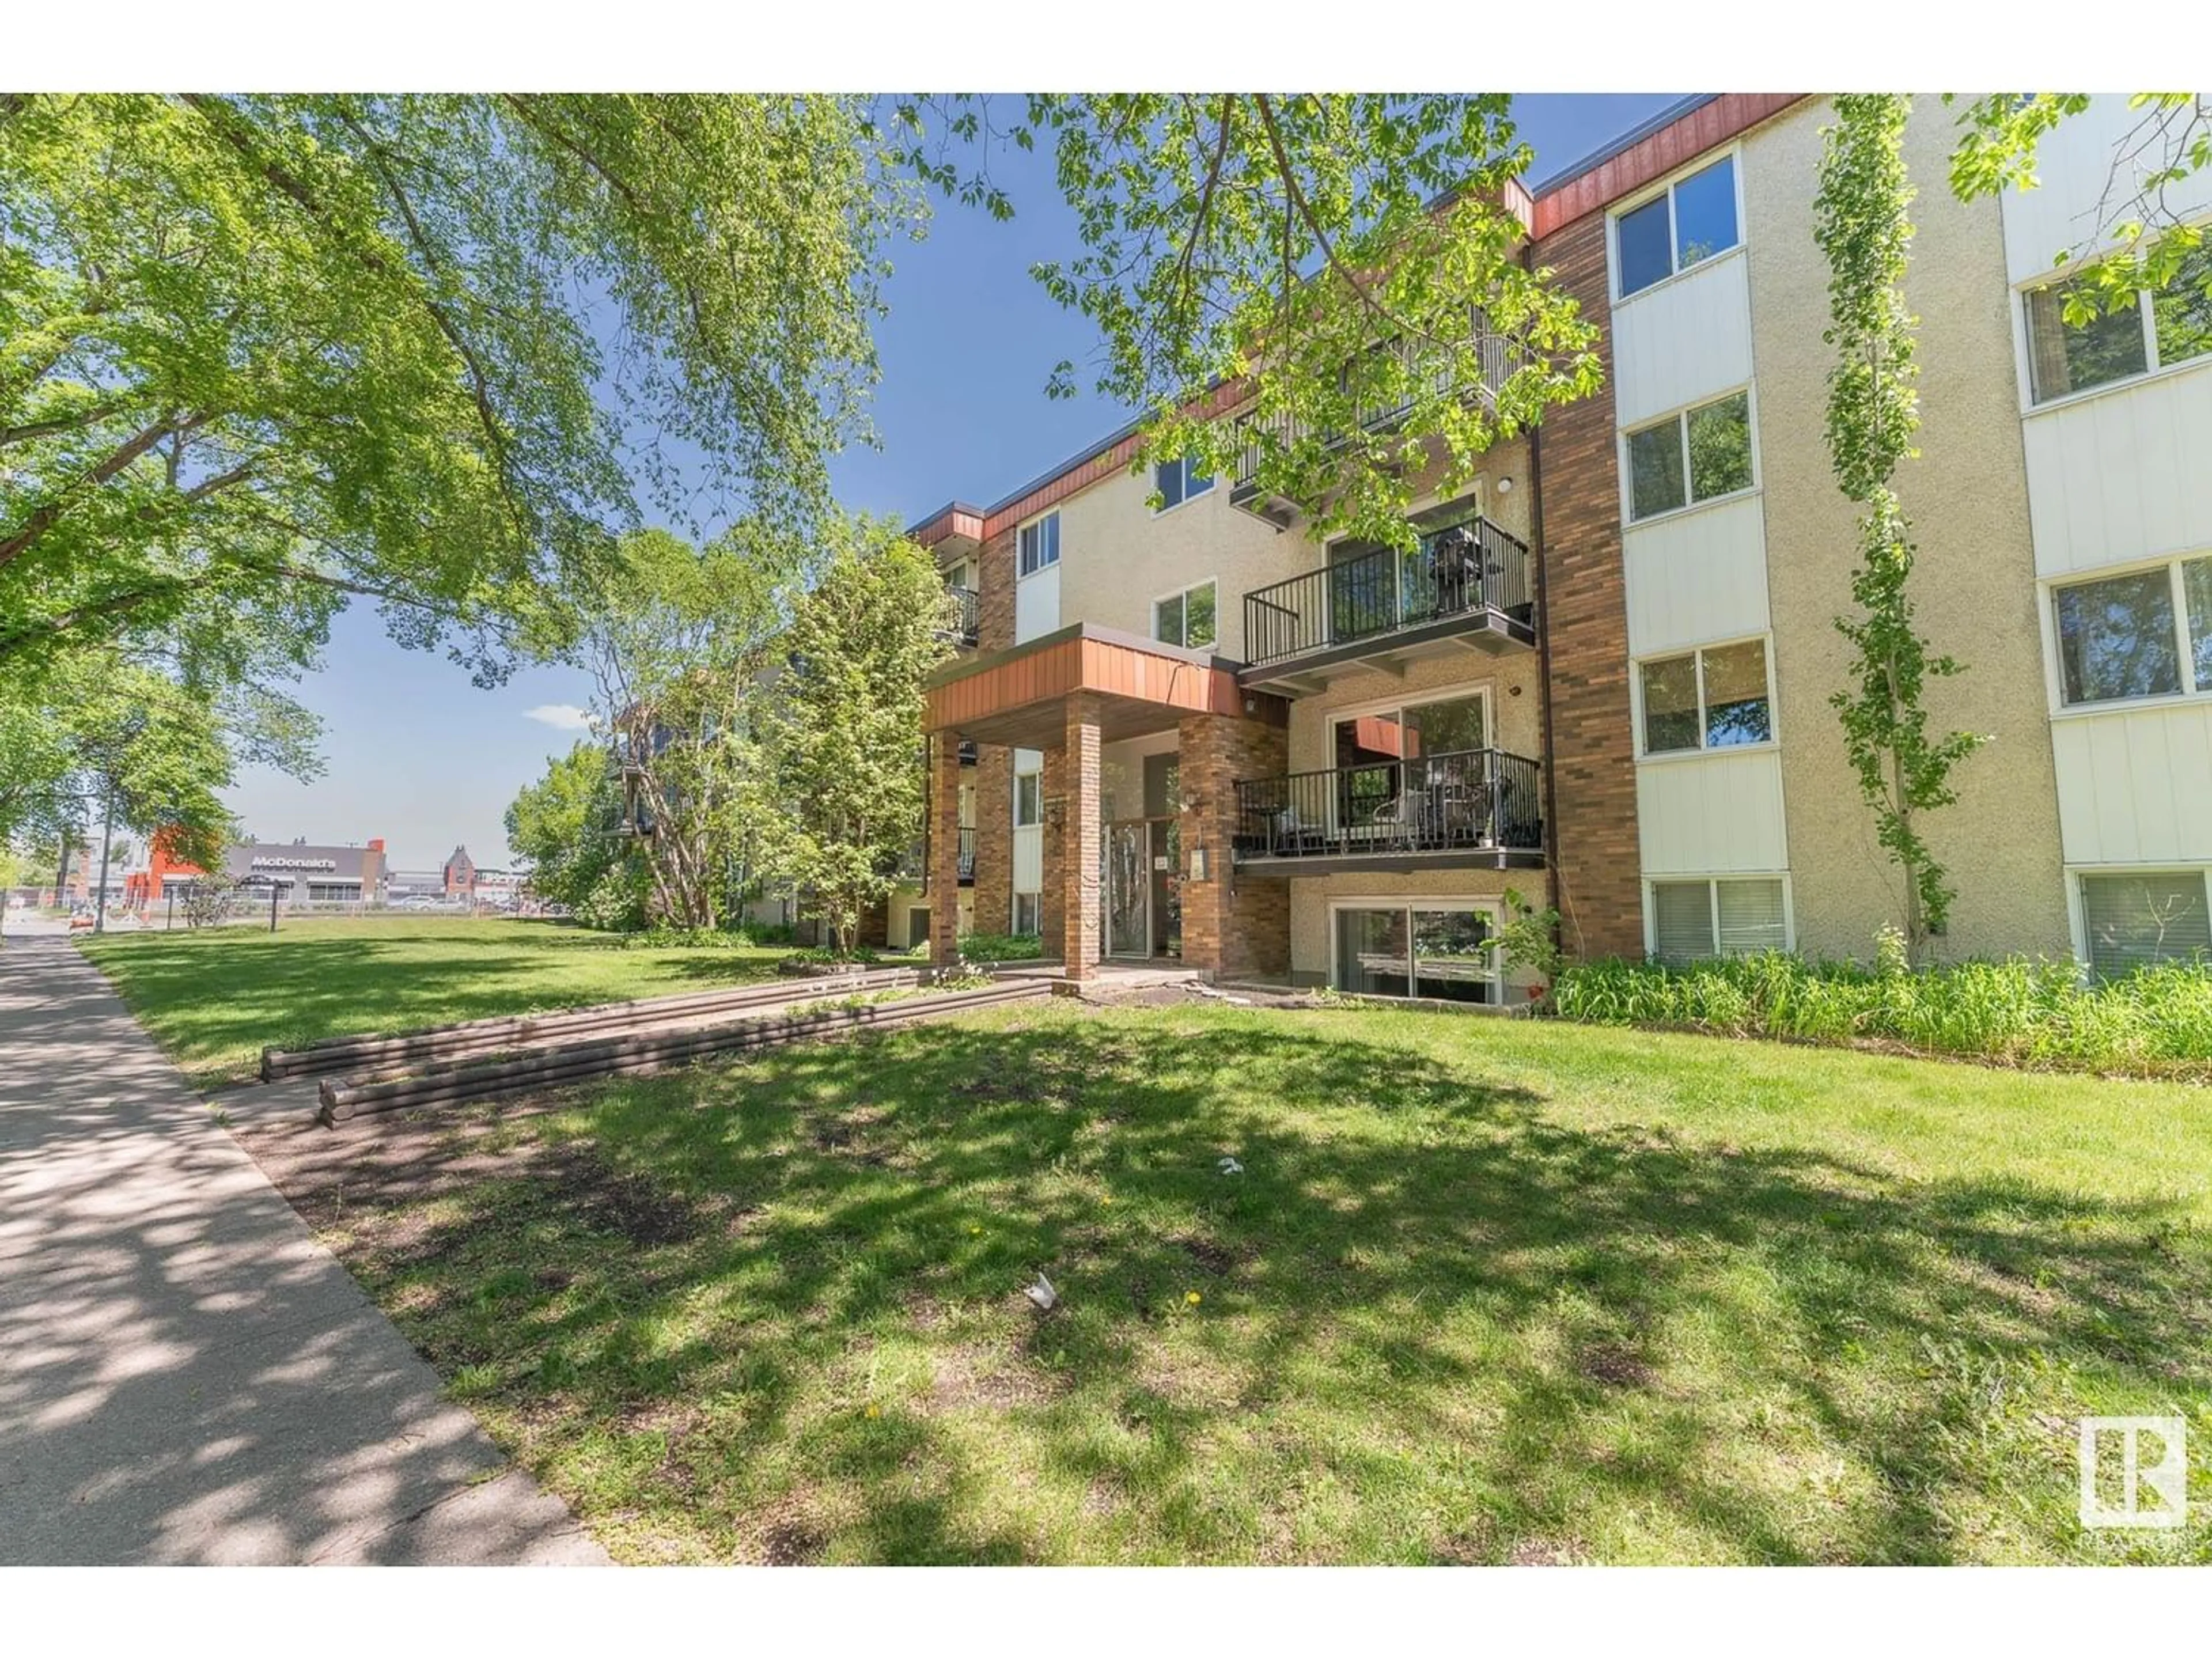 A pic from exterior of the house or condo for #301 10335 117 ST NW, Edmonton Alberta T5K1X9